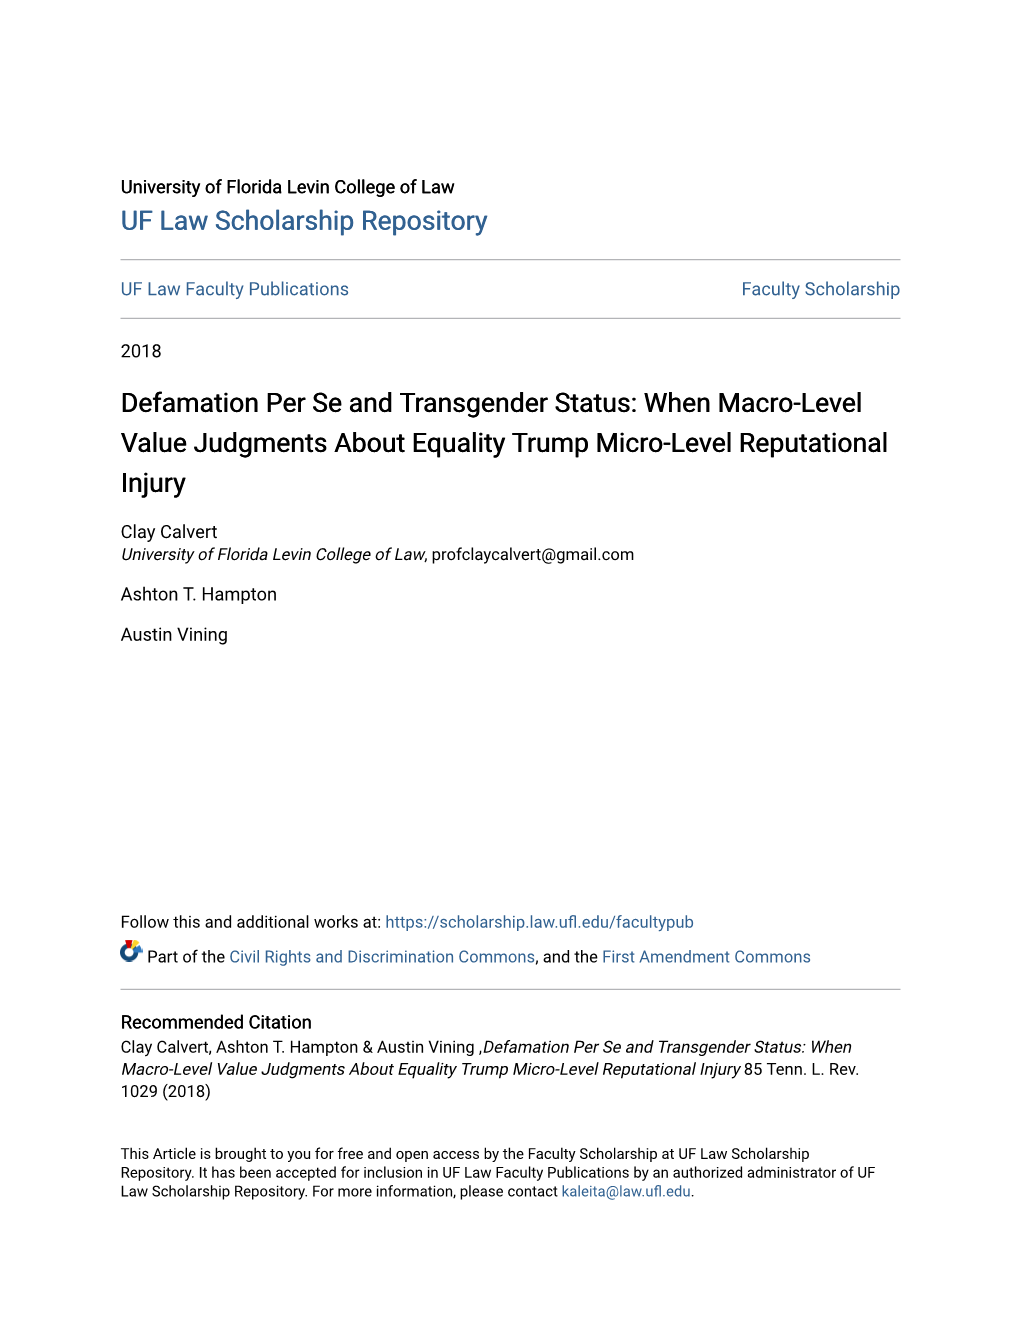 Defamation Per Se and Transgender Status: When Macro-Level Value Judgments About Equality Trump Micro-Level Reputational Injury